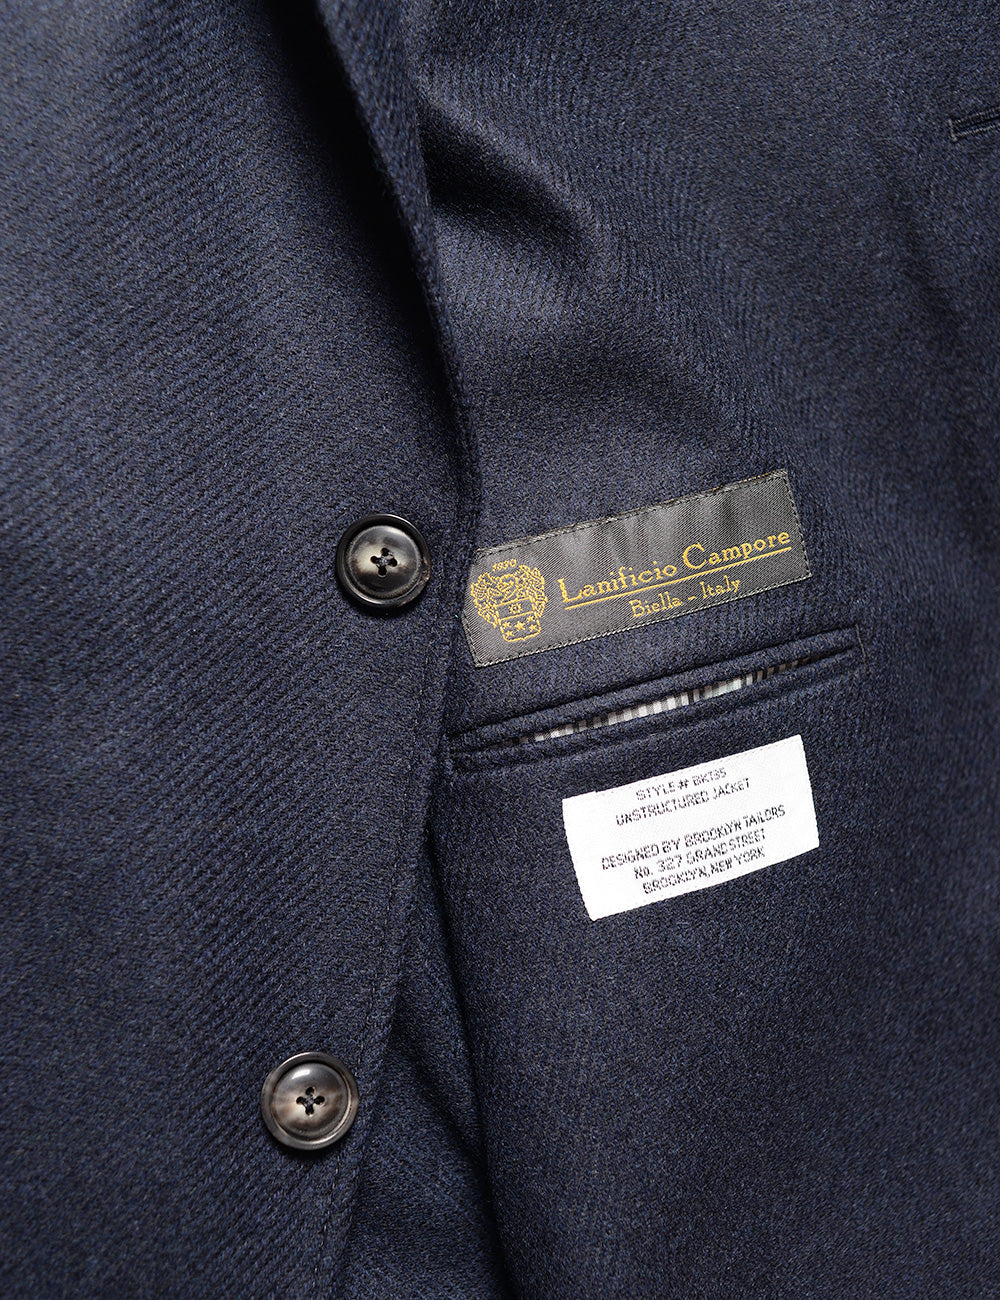 BROOKLYN TAILORS - BKT35 Unstructured Jacket in Twill Cashmere - Navy